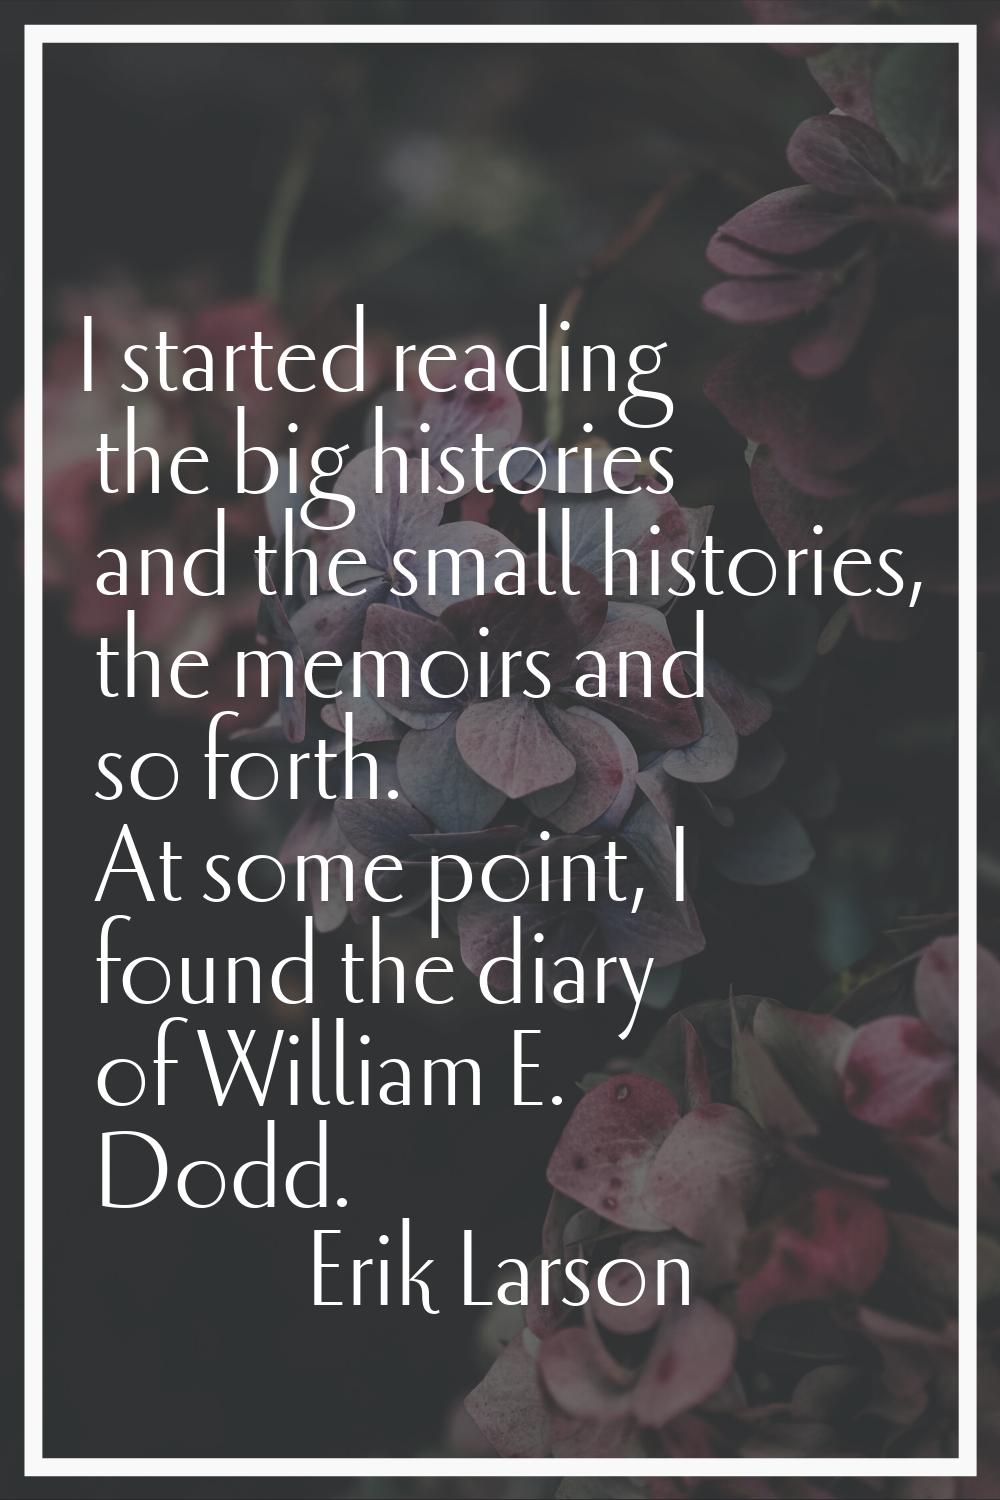 I started reading the big histories and the small histories, the memoirs and so forth. At some poin